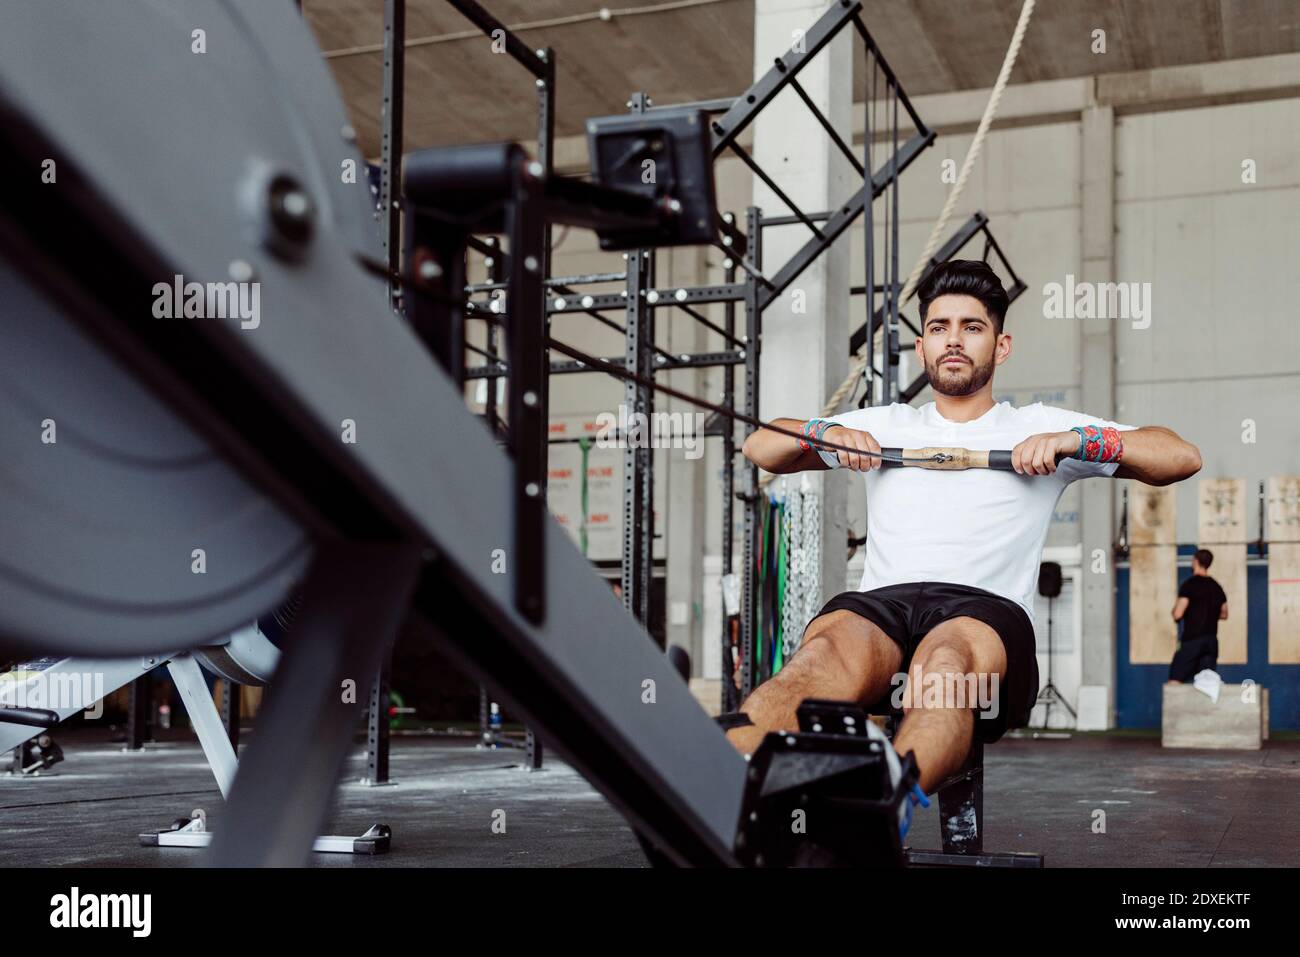 Sportsman exercising with rowing machine at gym Stock Photo